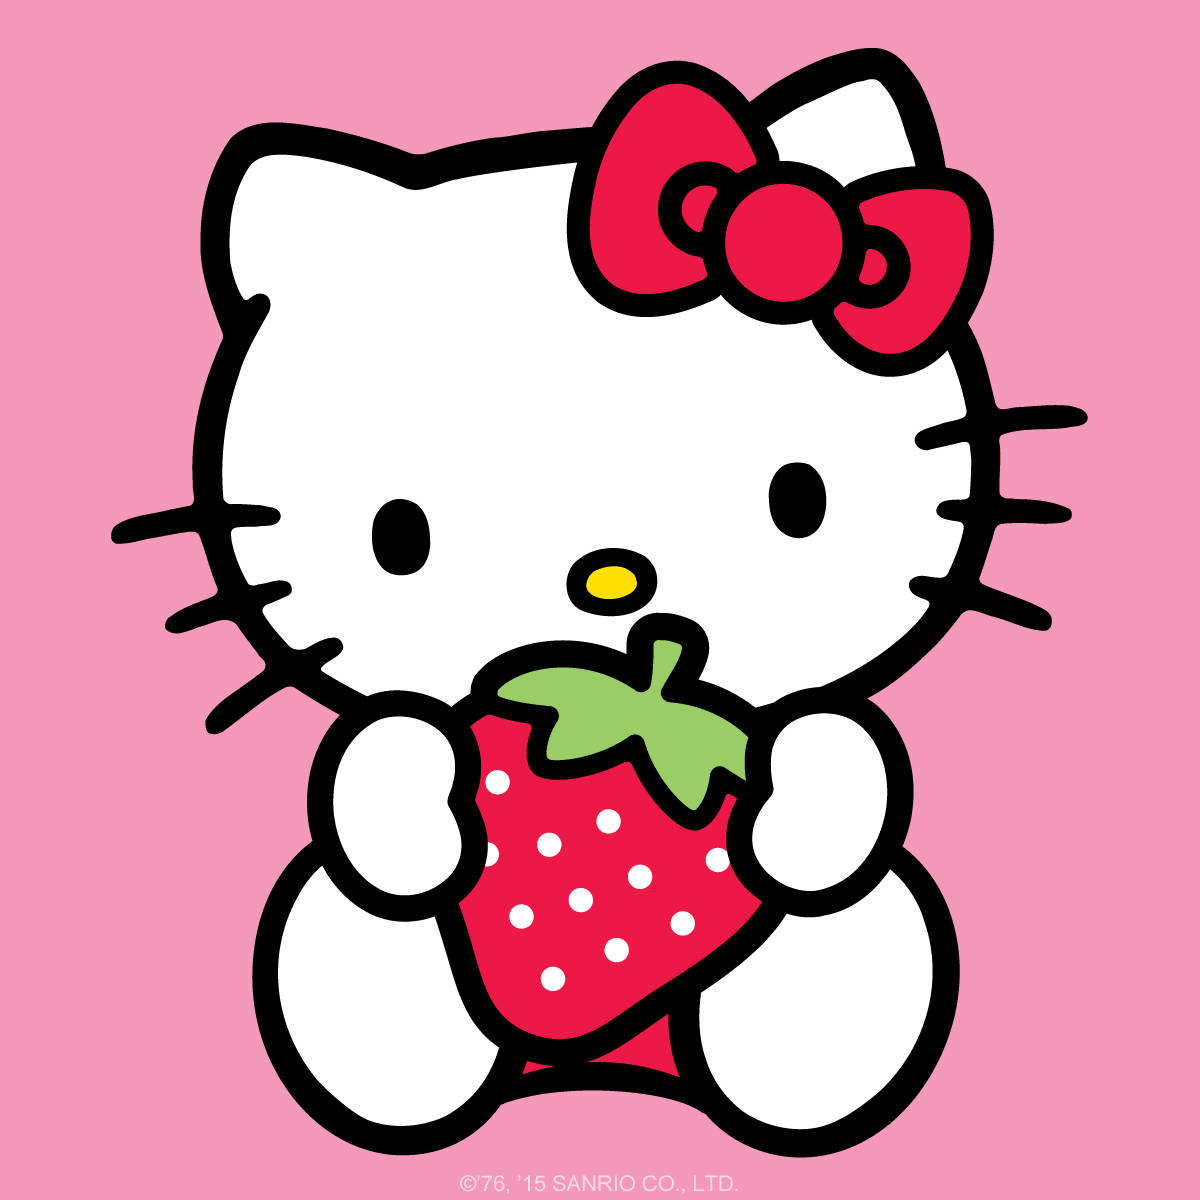 300+] Hello Kitty Wallpapers for FREE 